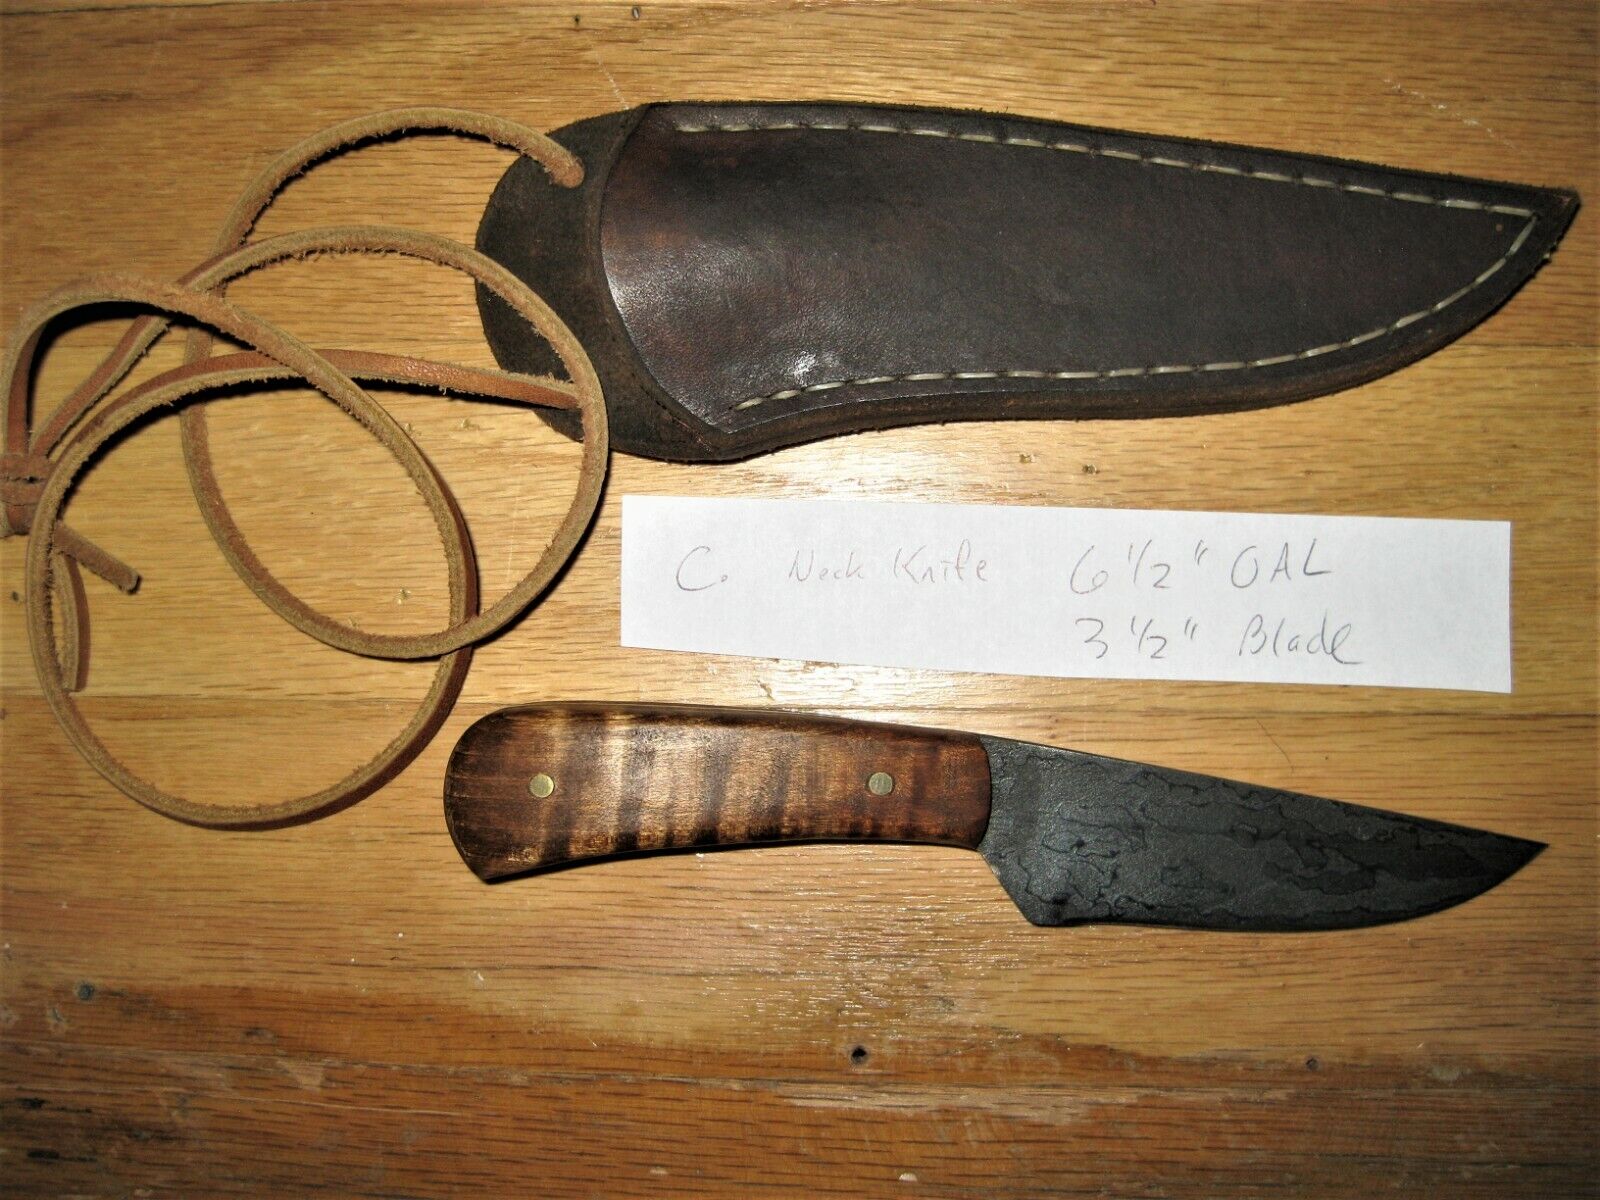 Mountain Man Rendezvous Hand Made Knife and Sheath, Rocking K, Mike Kiley, C